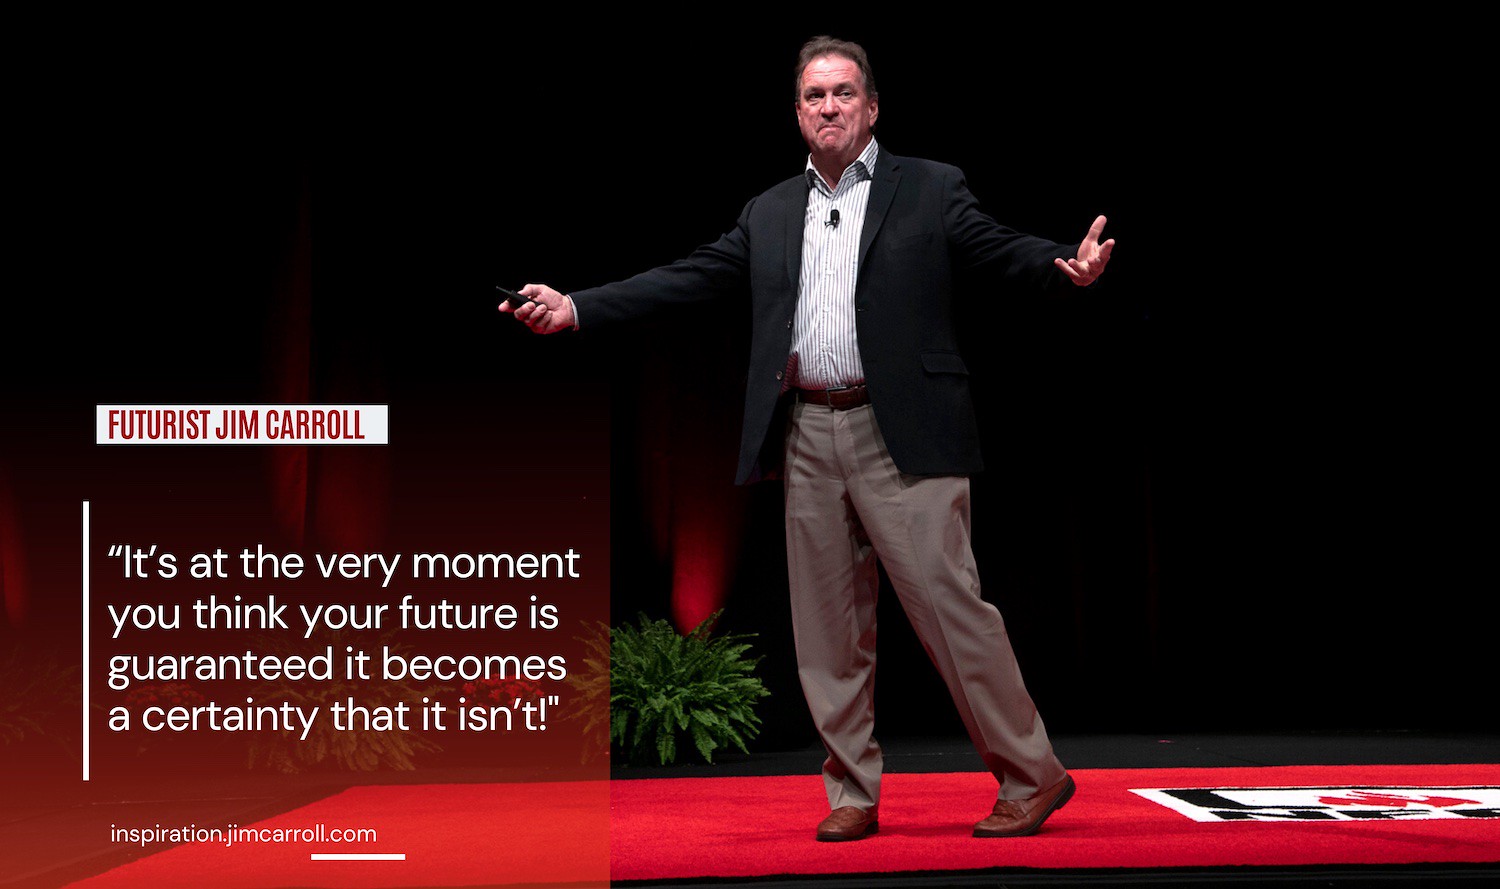 "It’s at the very moment you think your future is guaranteed it becomes a certainty that it isn’t!" - Futurist Jim Carroll